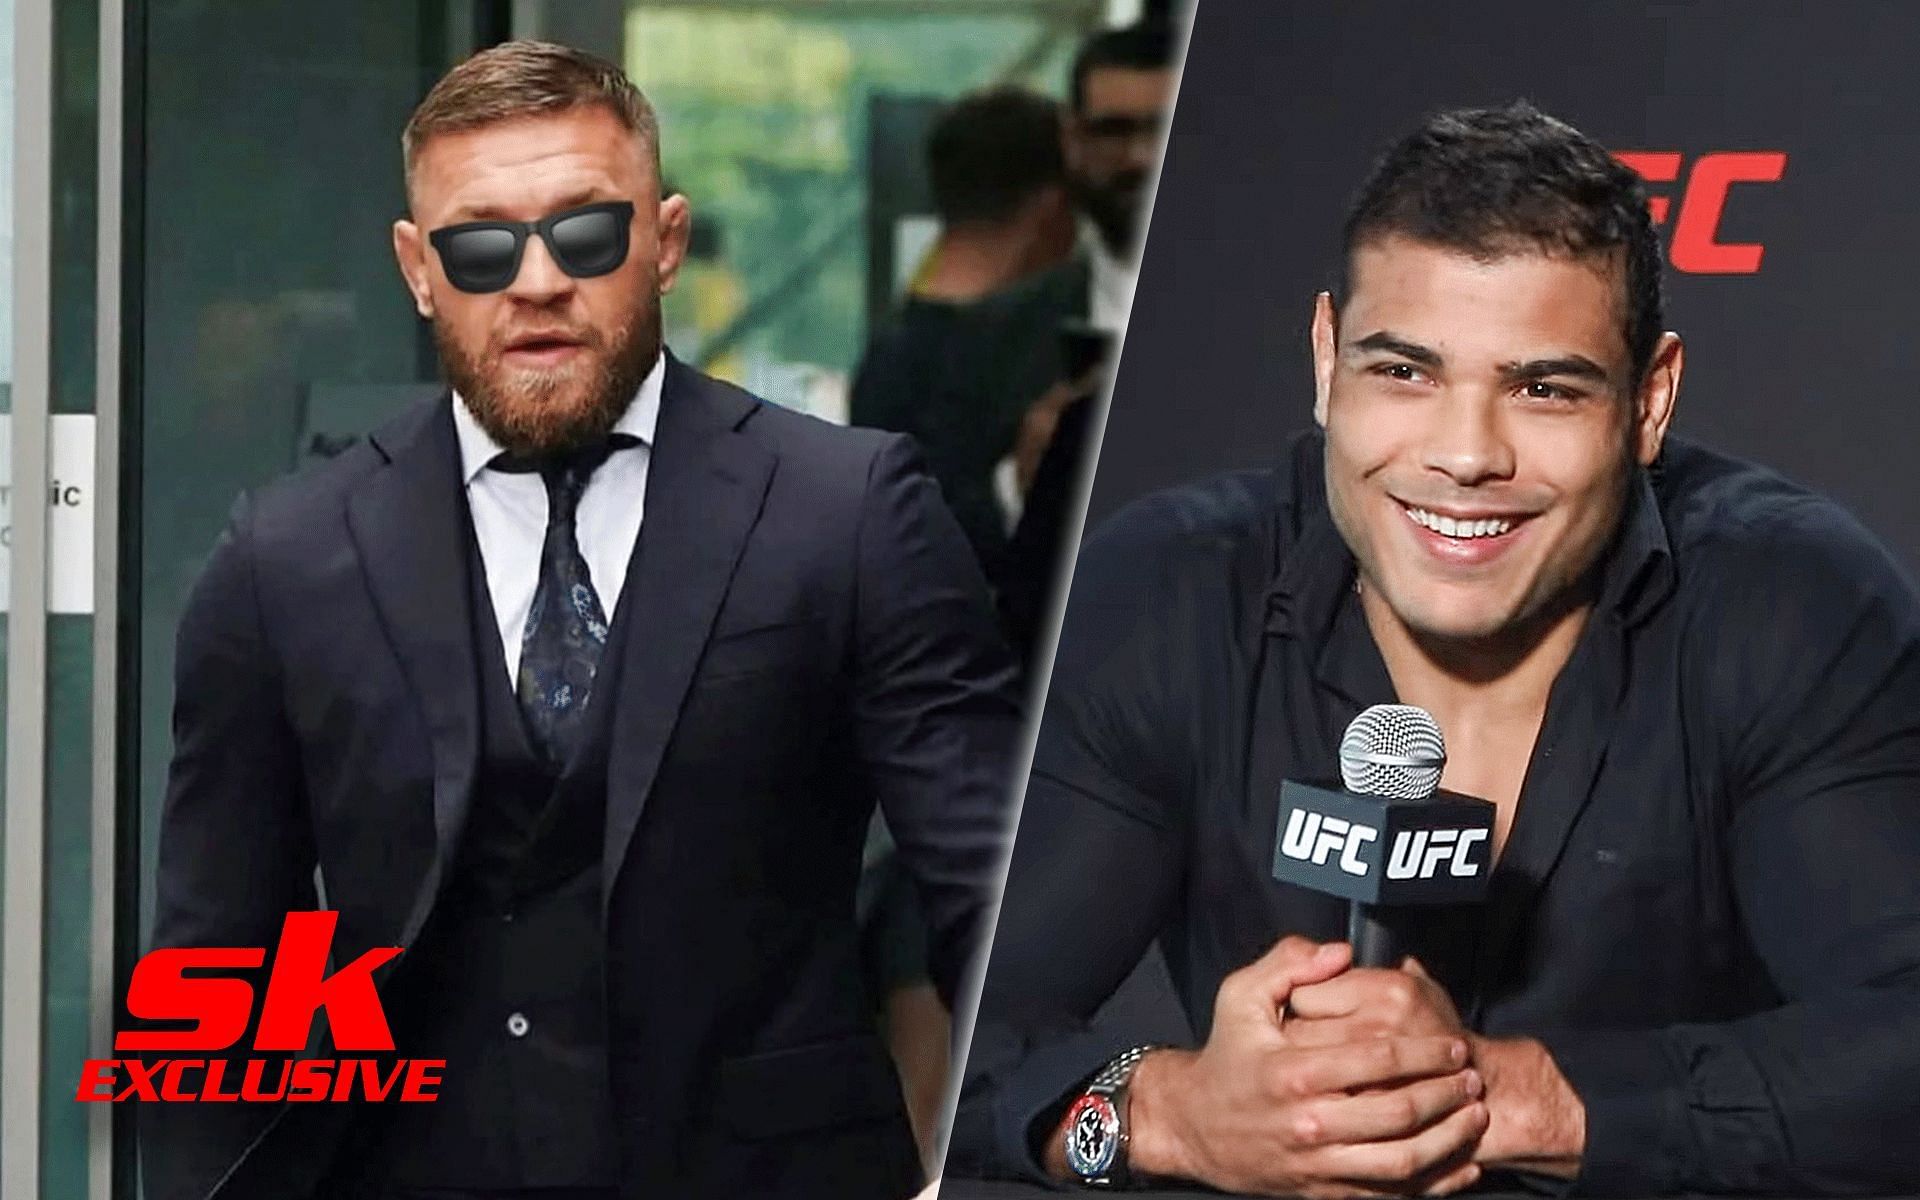 Conor McGregor (L) (via @thenotoriousmma on Instagram), Paulo Costa (R) (via @TheMacLife on YouTube)